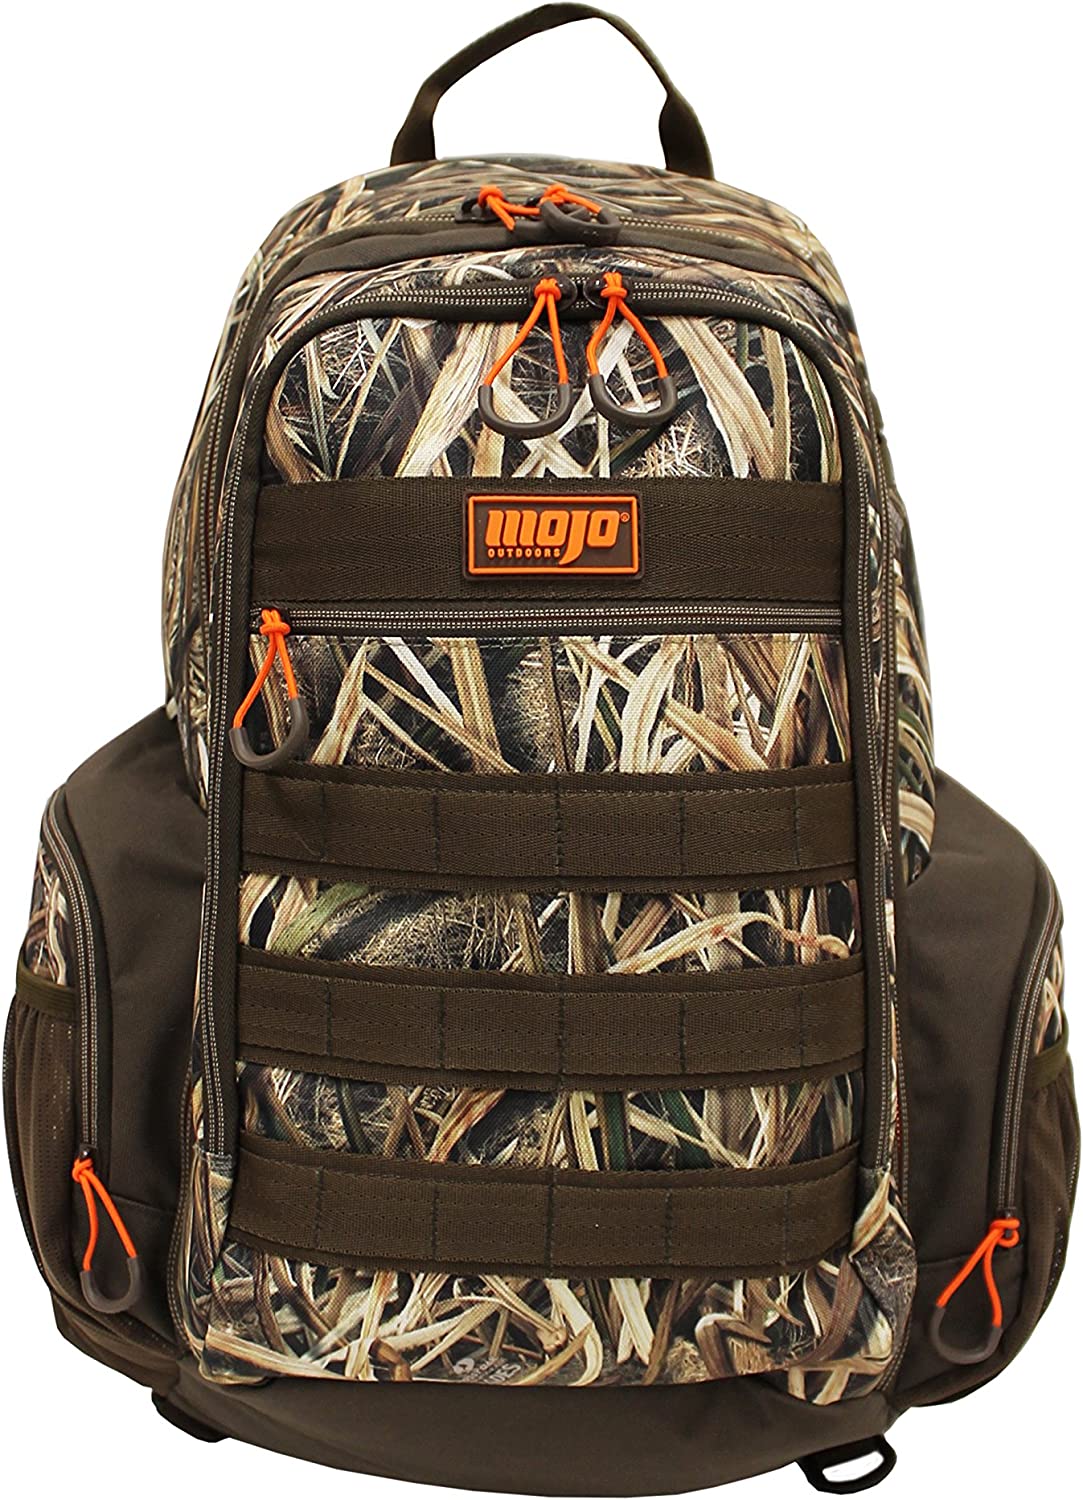 Sac à dos de chasse - Camouflage - MOJO Outdoors - ProChasse